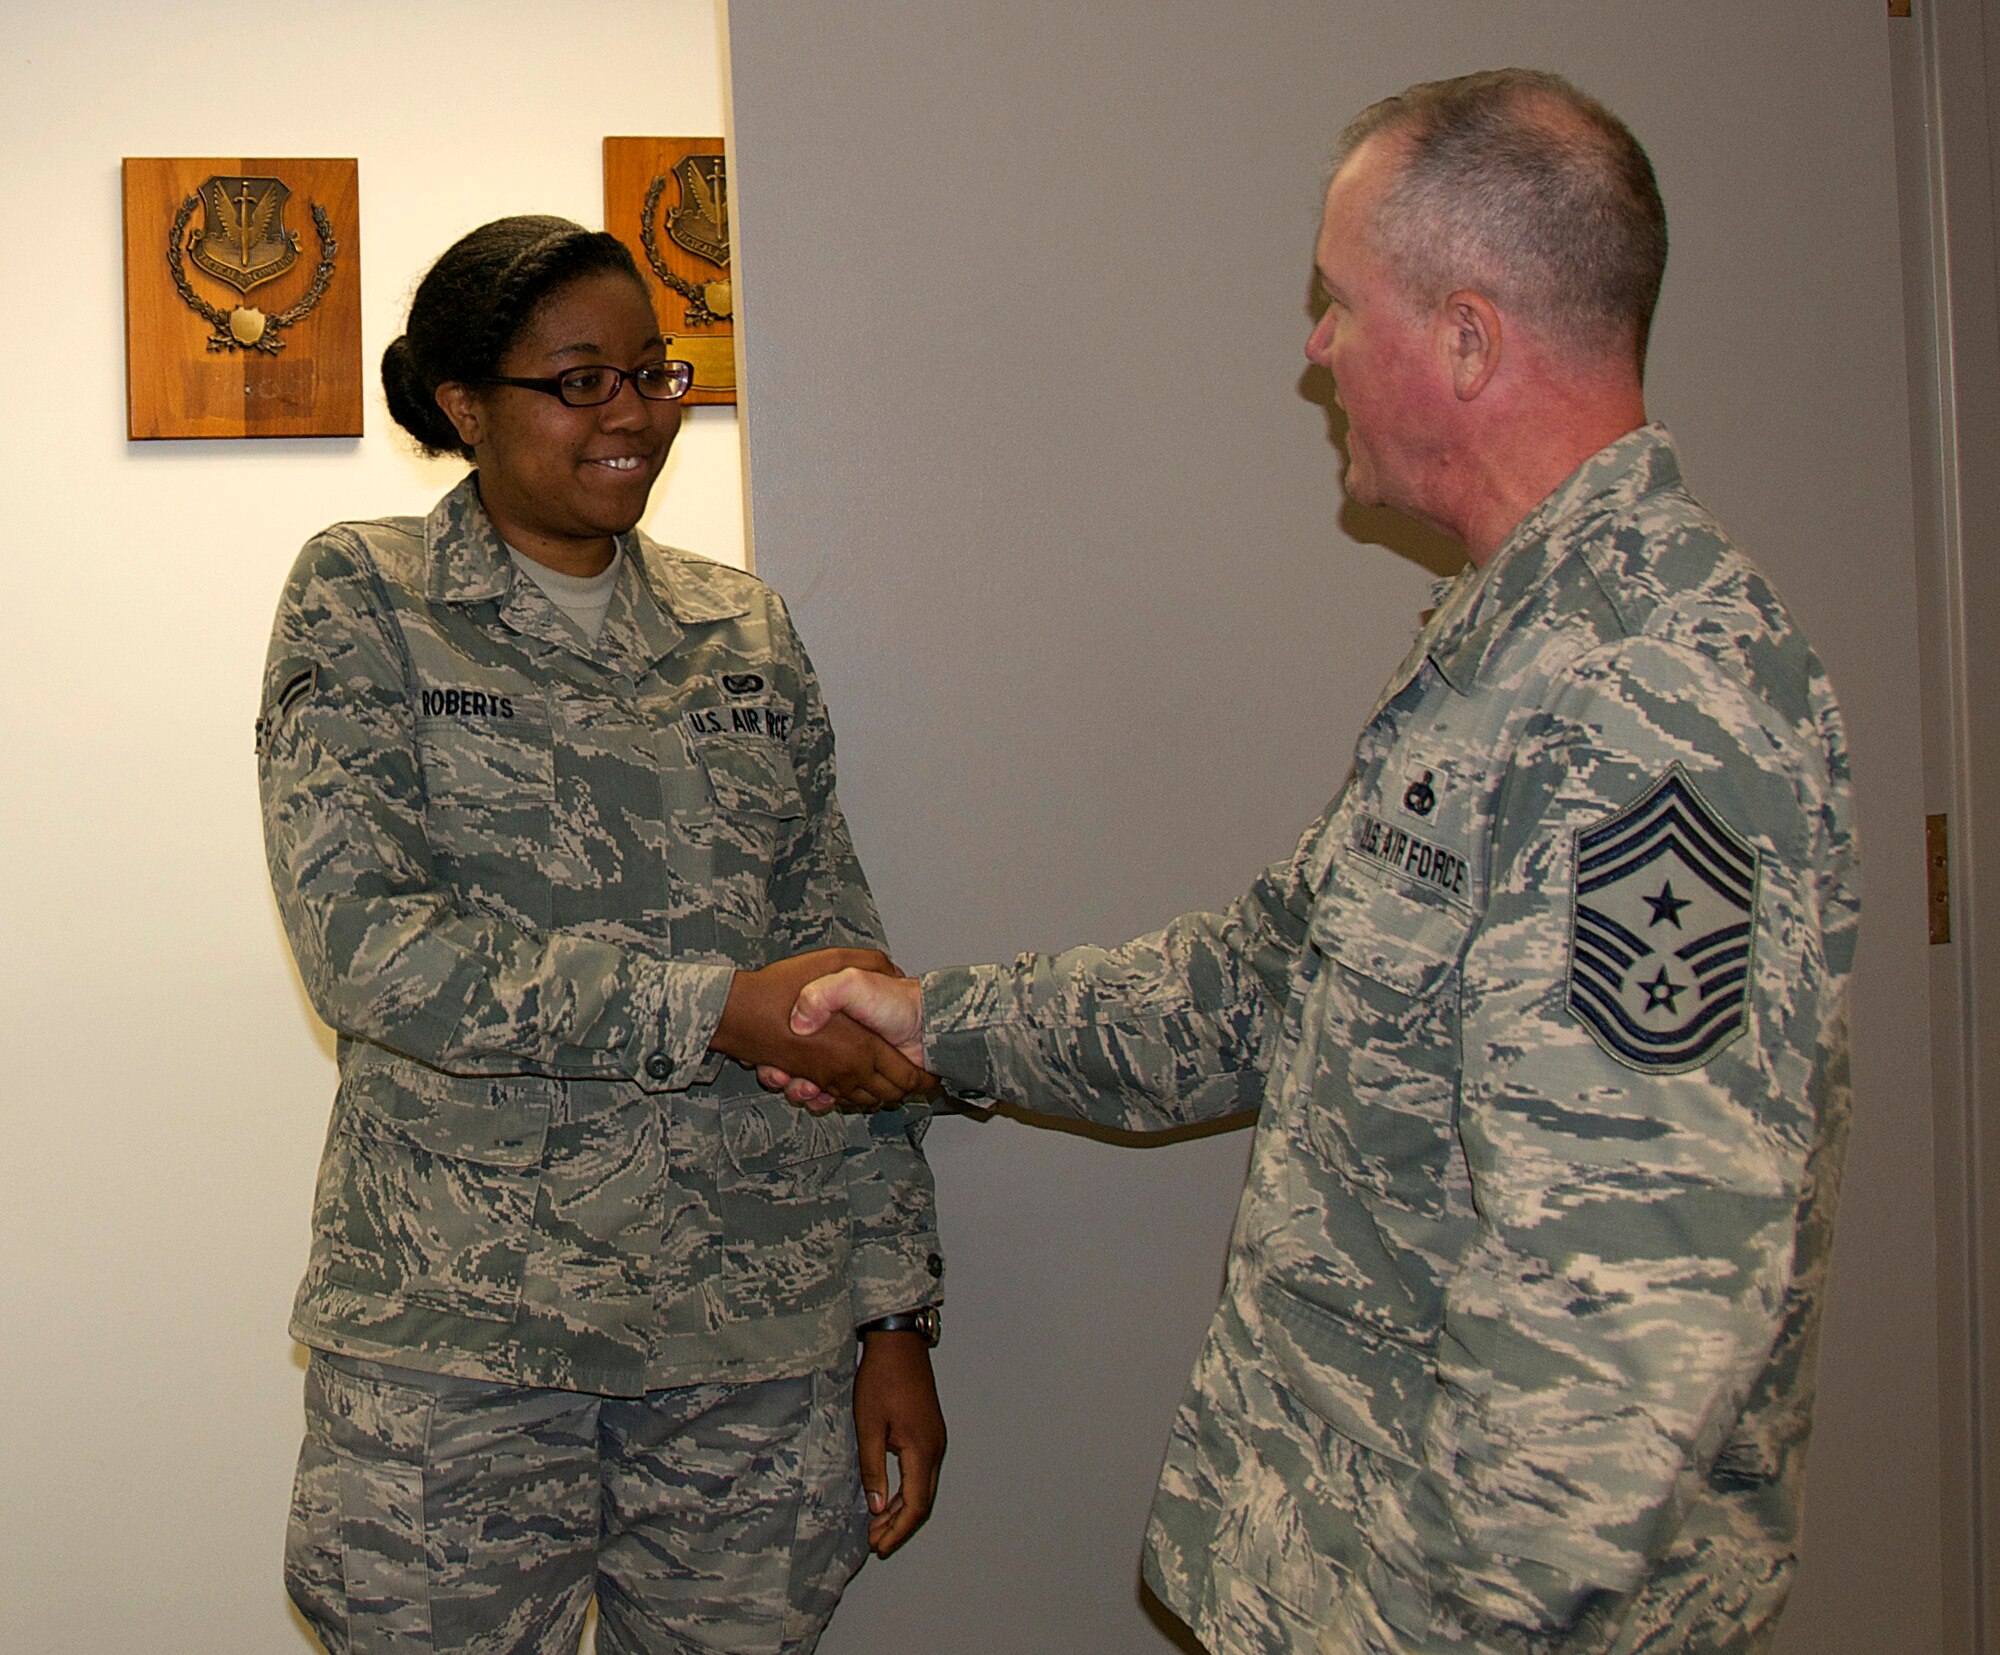 Senior Airman Johnisa B. Roberts, 192nd Fighter Wing Public Affairs photojournalist, received an outstanding performance chip from Command Chief Master Sgt. Michael J. Bouley, 192nd FW command chief, September 13, 2015 at Joint Base Langley-Eustis, Virginia. Chief Bouley coined (“chipped”) Roberts to recognize her for obtaining her Bachelor’s degree in Mathematics, May 2015 from Christopher Newport University in Newport News, Virginia. Roberts is currently continuing her education at CNU as part of a five-year program to obtain her Master’s in the Arts of Teaching. (U.S. Air National Guard photo by Master Sgt. Carlos J. Claudio/Released)